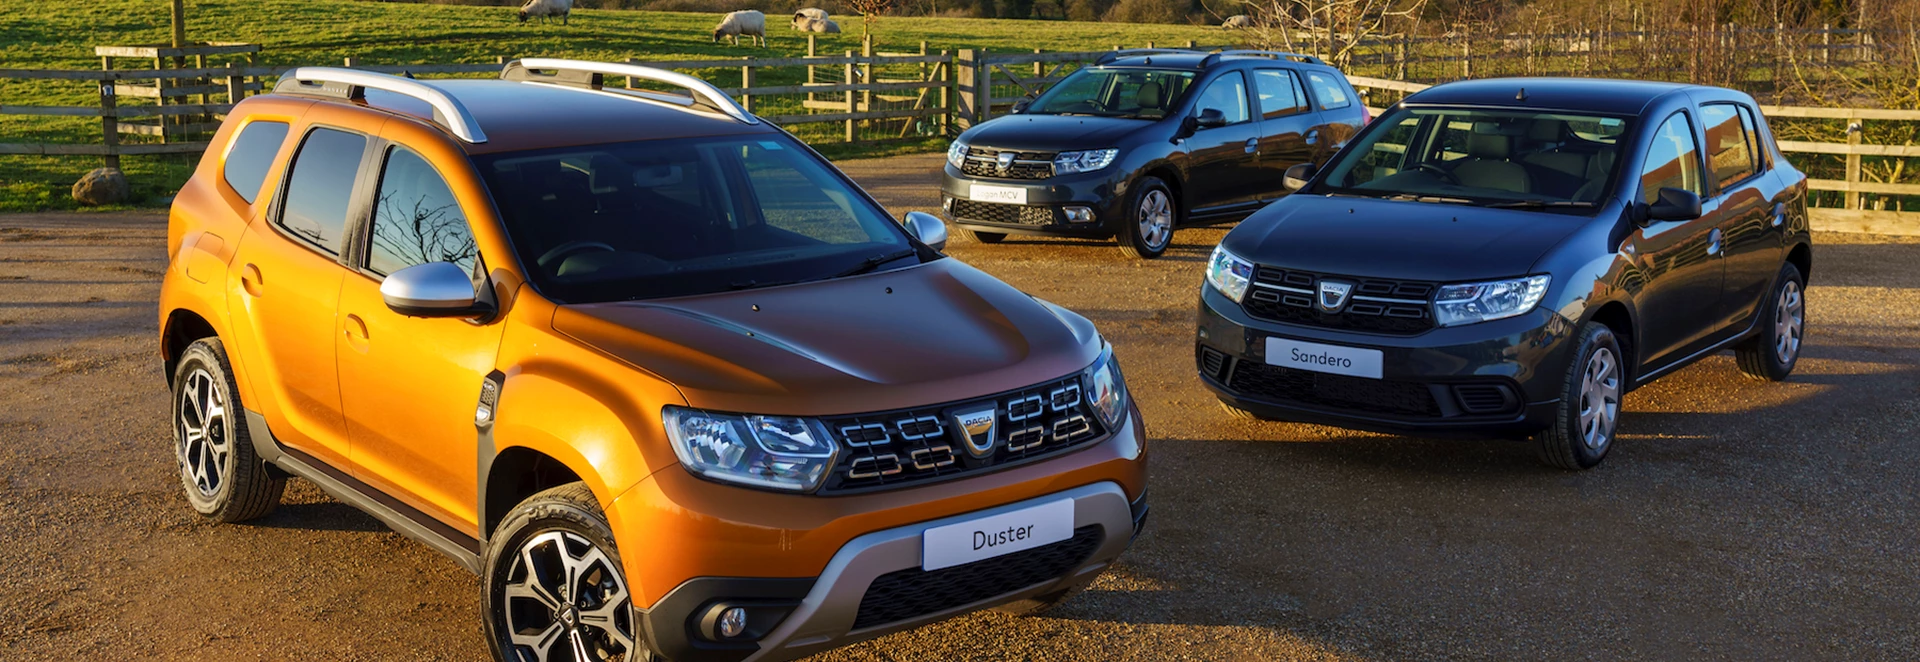 Dacia announces free home delivery for customers buying cars online 